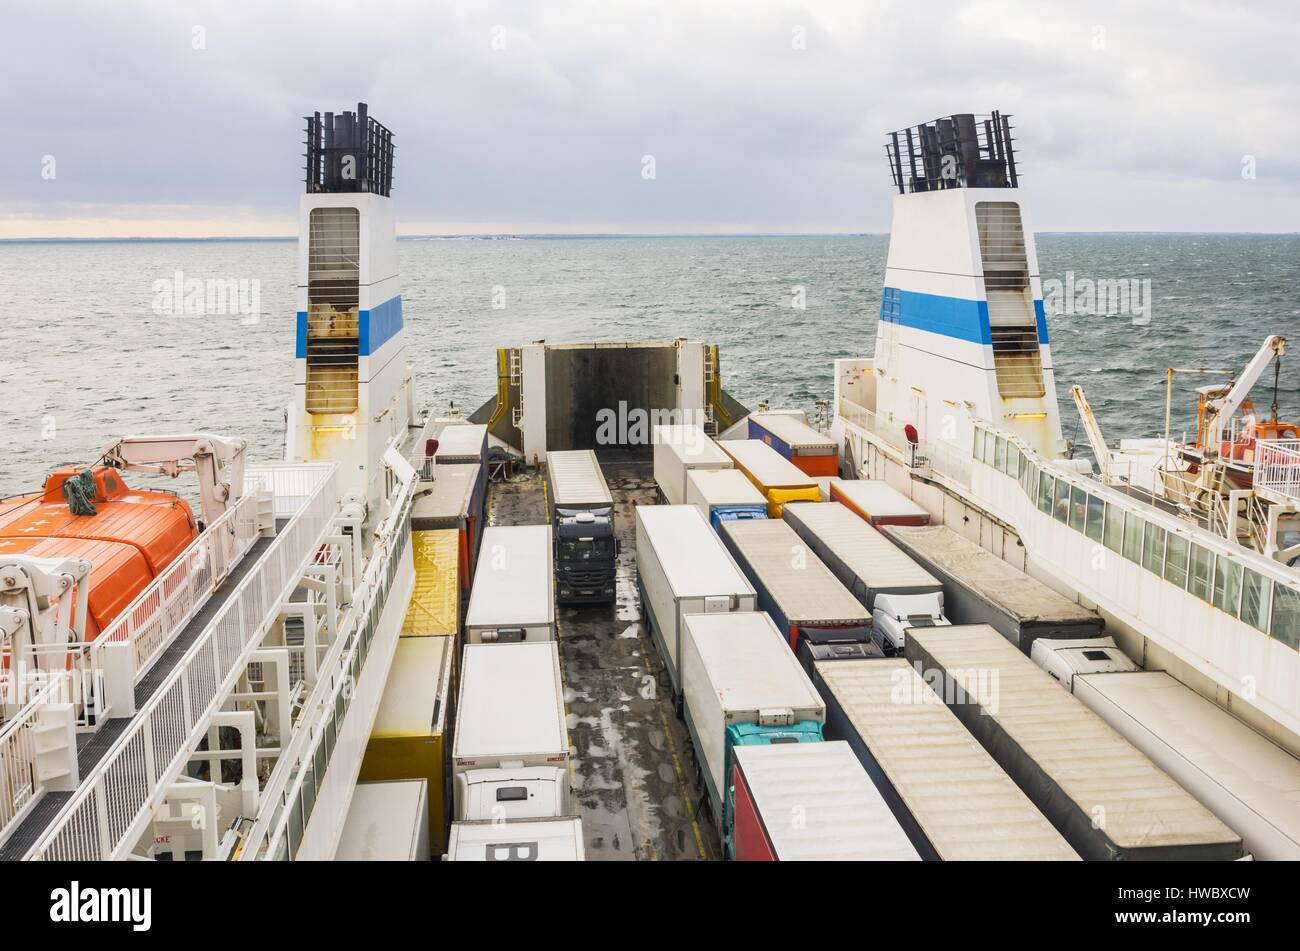 Trucks hosted on a ferry in the sea between Sweden and Finland Stock Photo